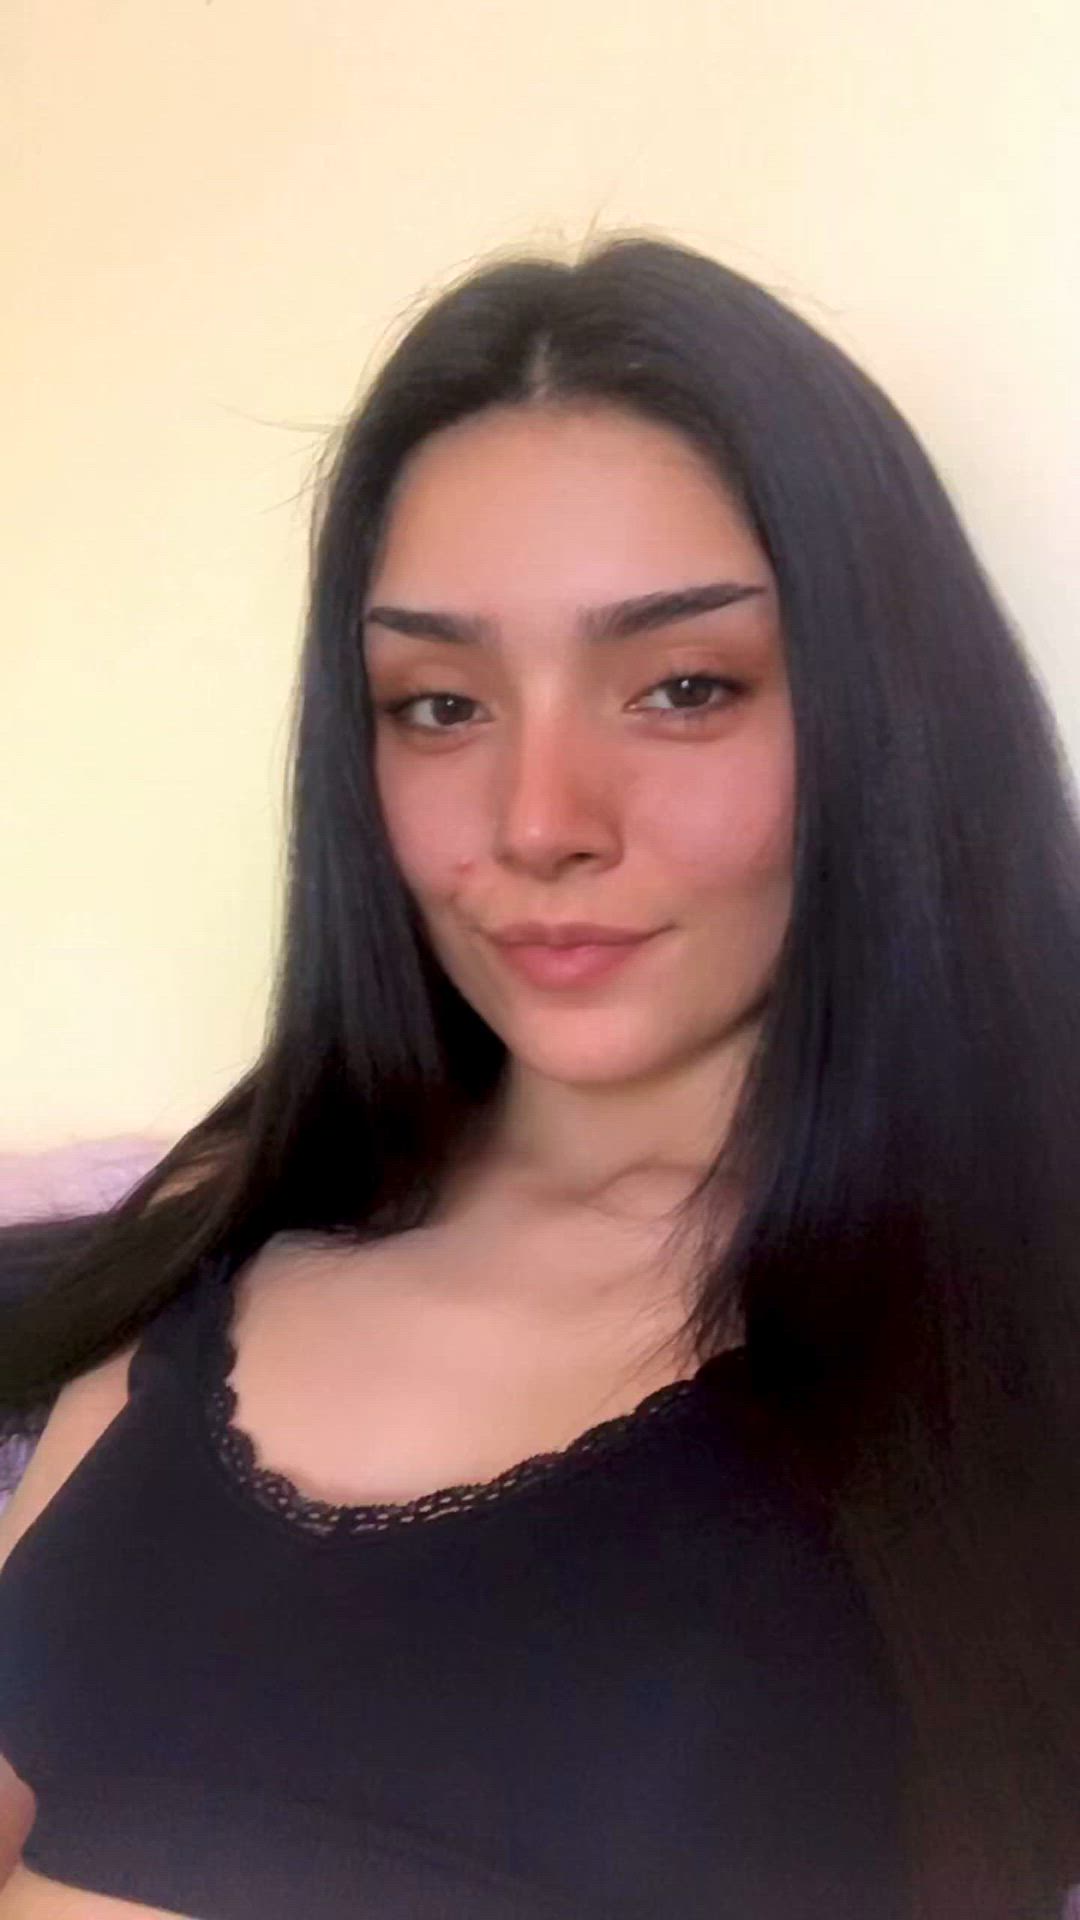 Amateur porn video with onlyfans model isaflorees <strong>@isabella_flores98</strong>